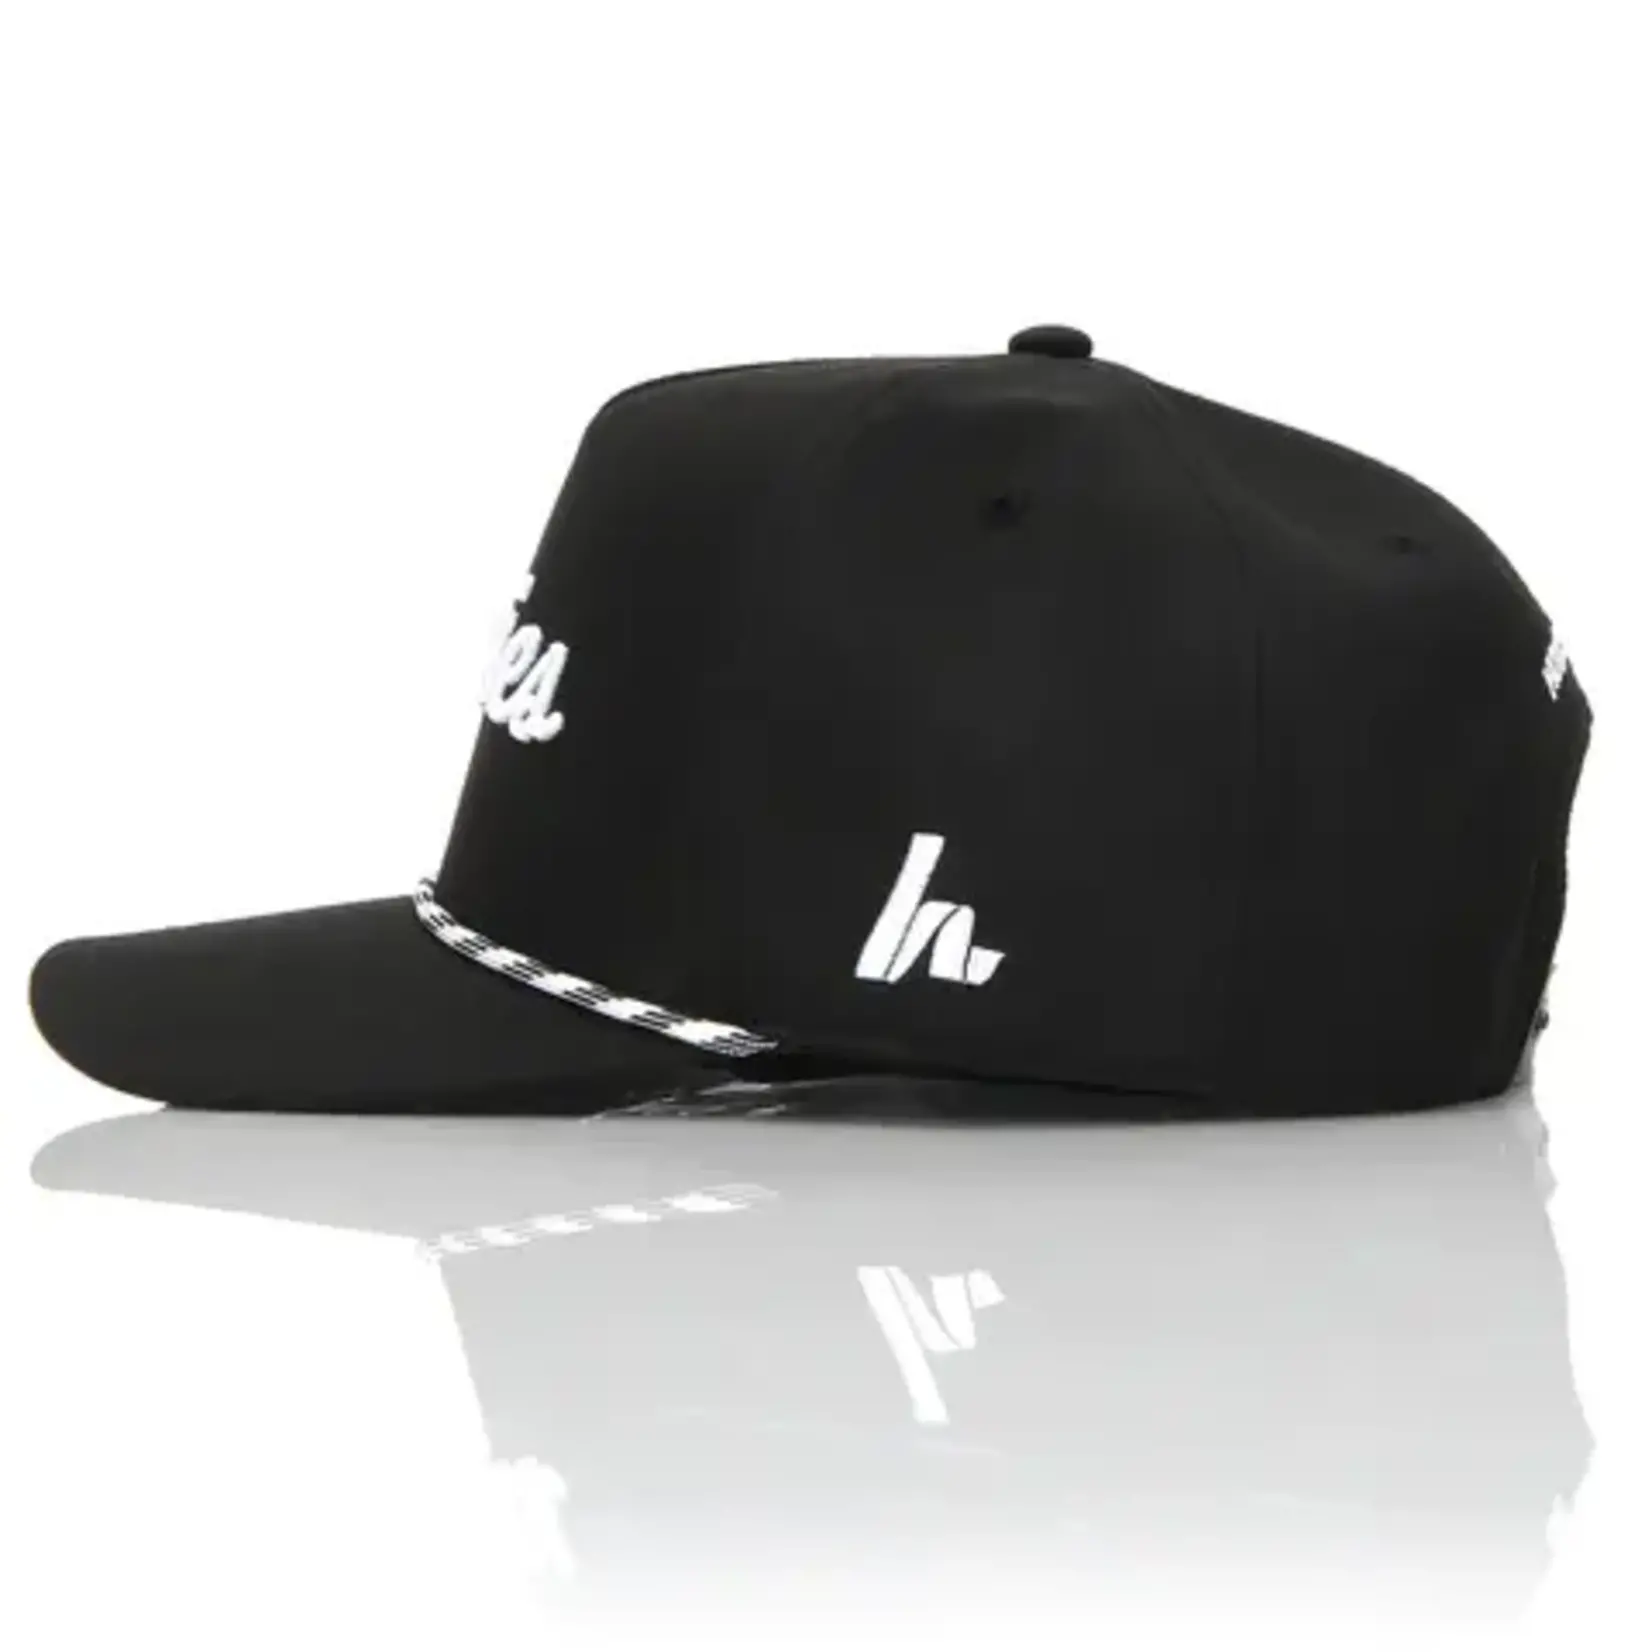 Howies Howies Lid the Tour Hat (BLACK)